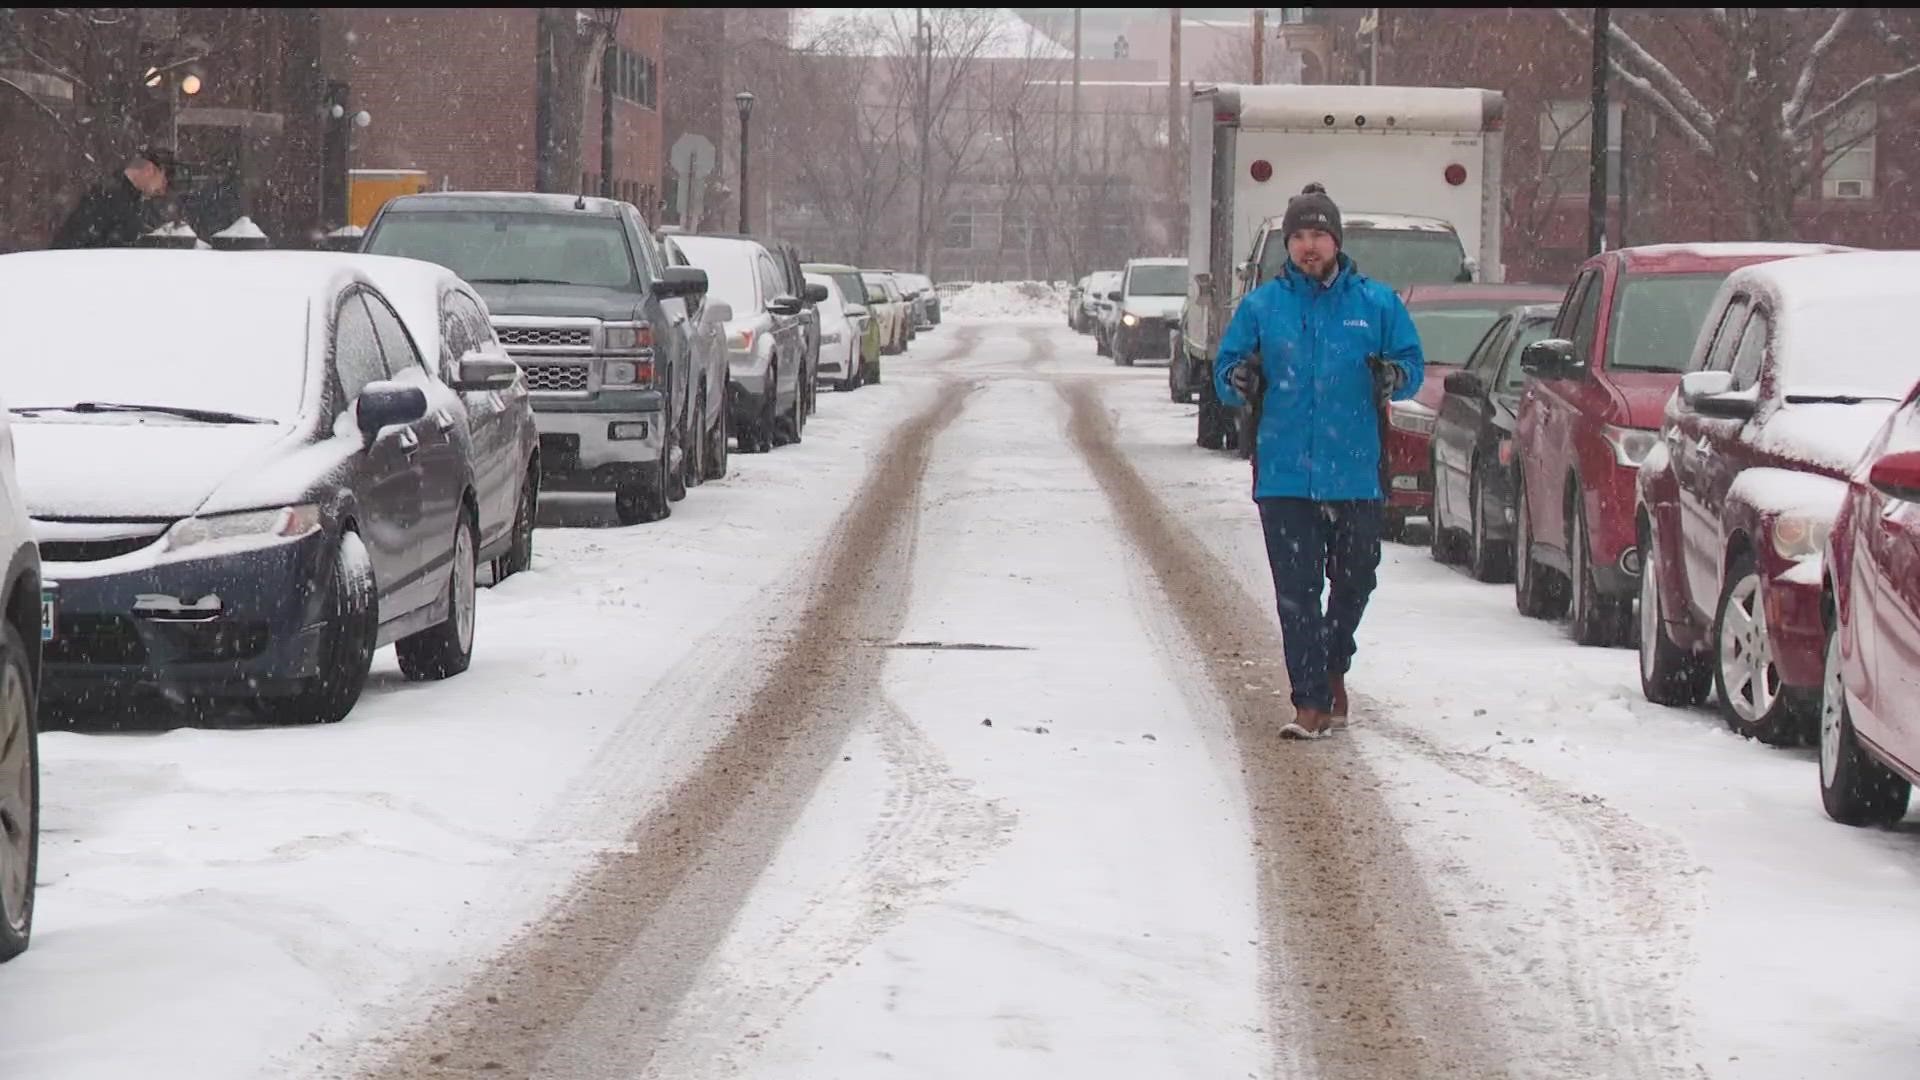 Officials announced that parking on non-snow emergency routes in Minneapolis will be one-sided beginning Thursday at 9 p.m. due to snow-narrowed streets.